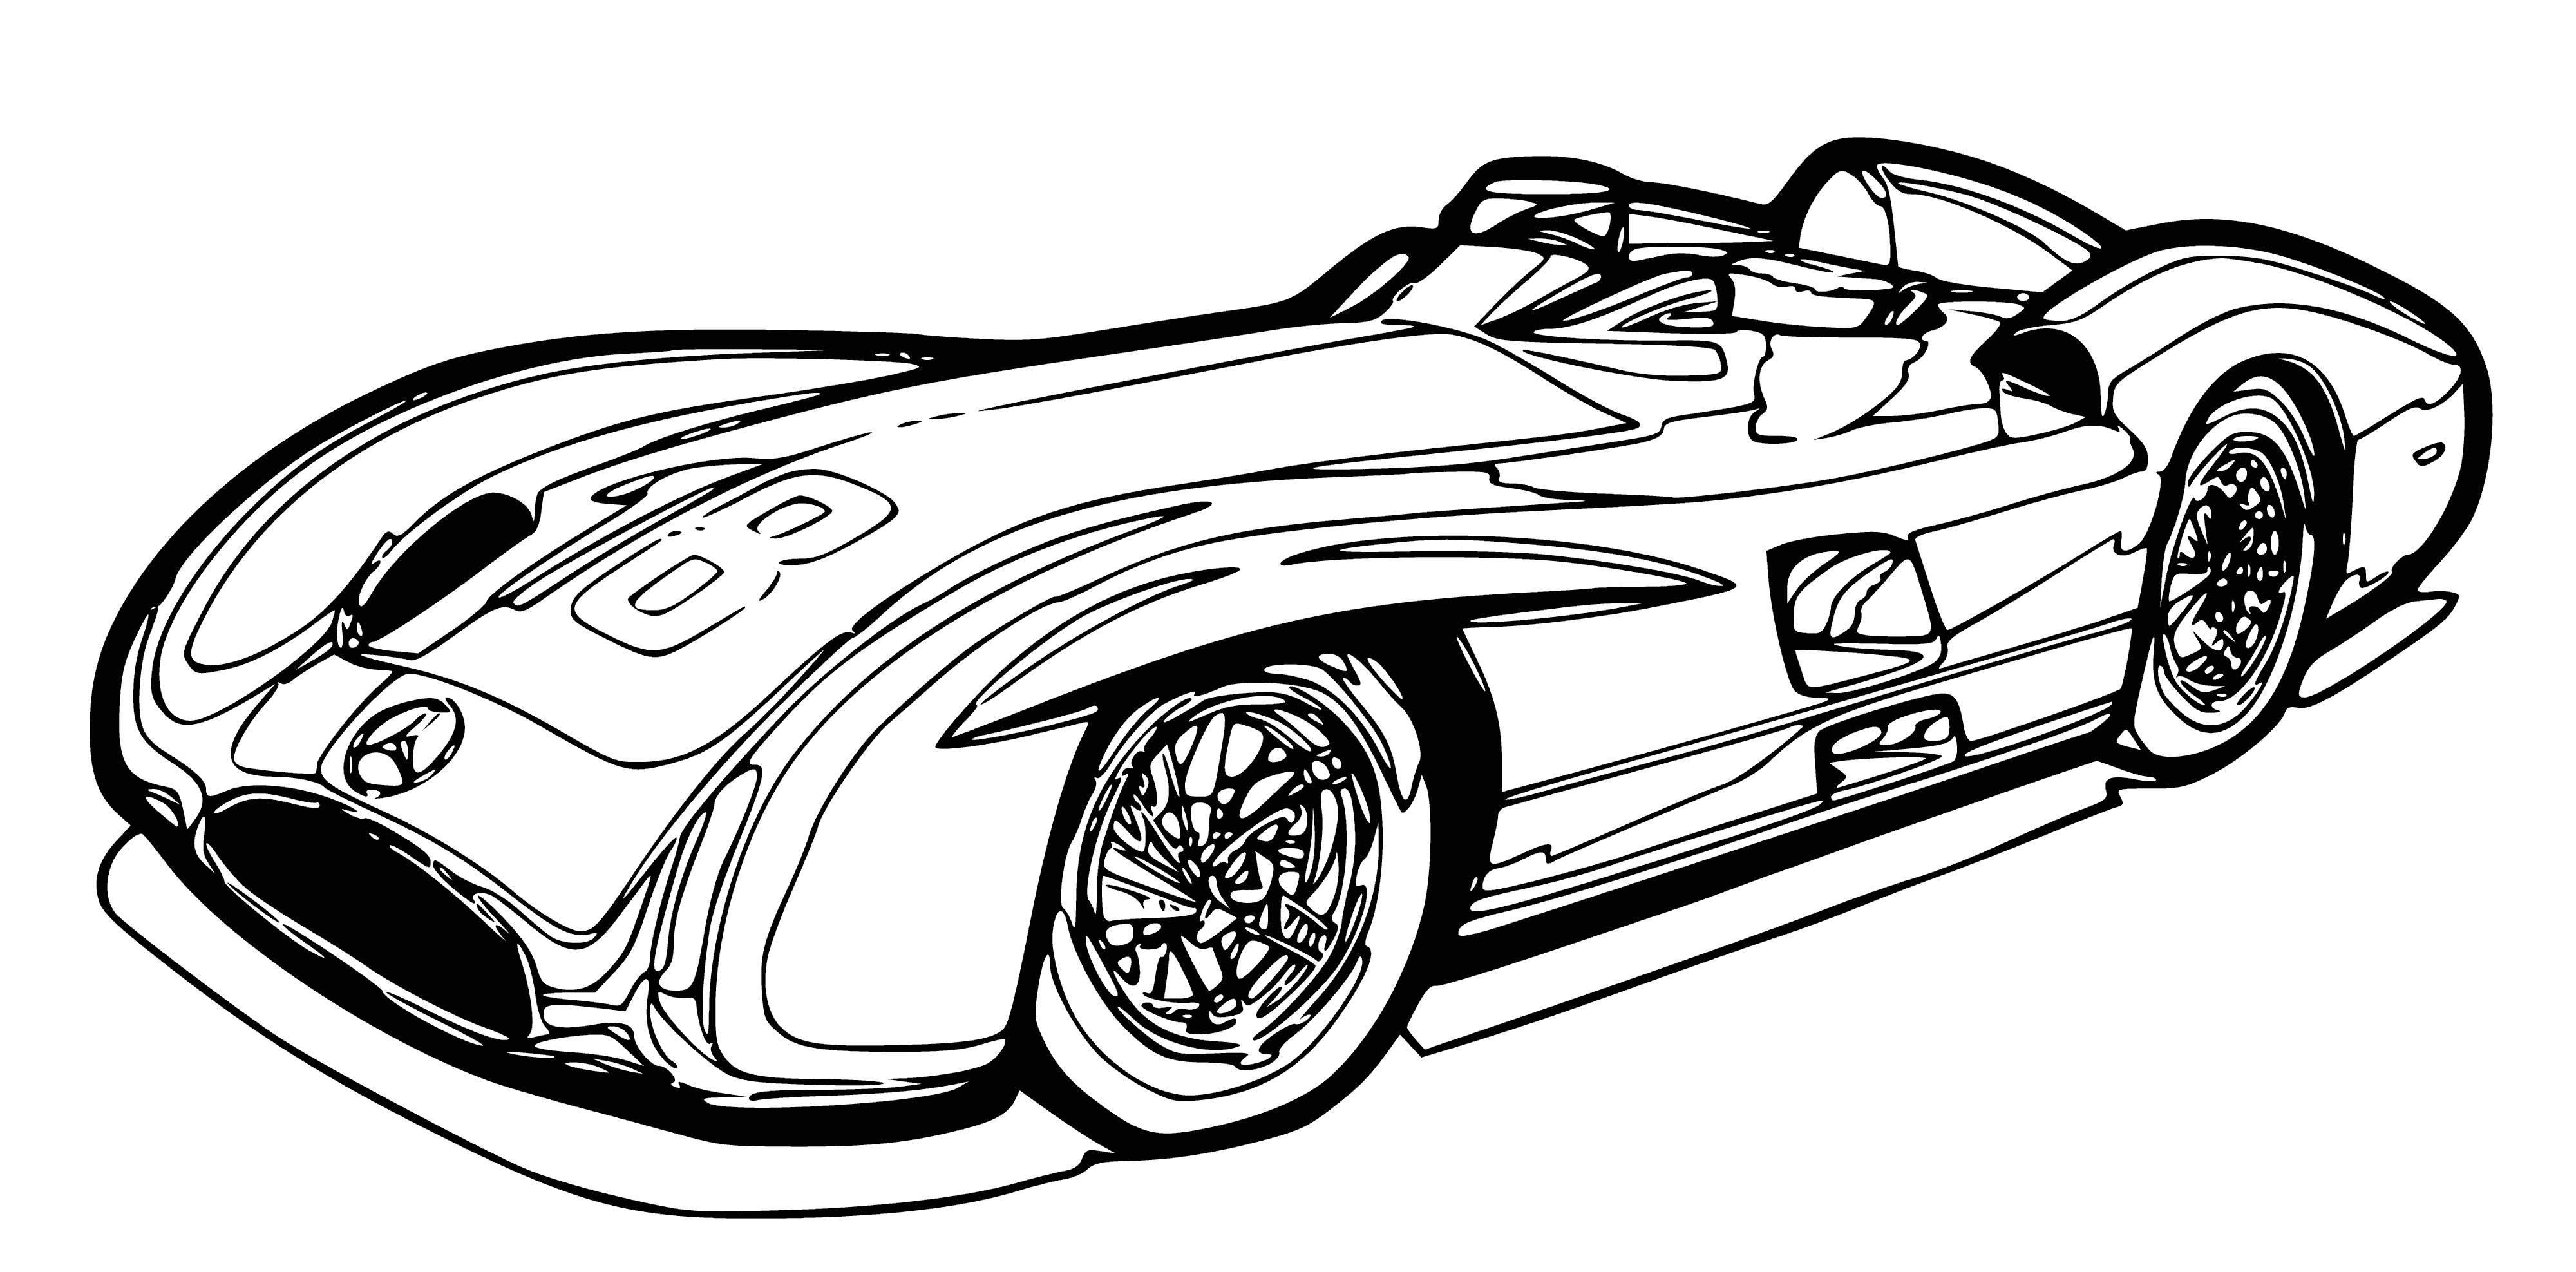 1954 coloring page